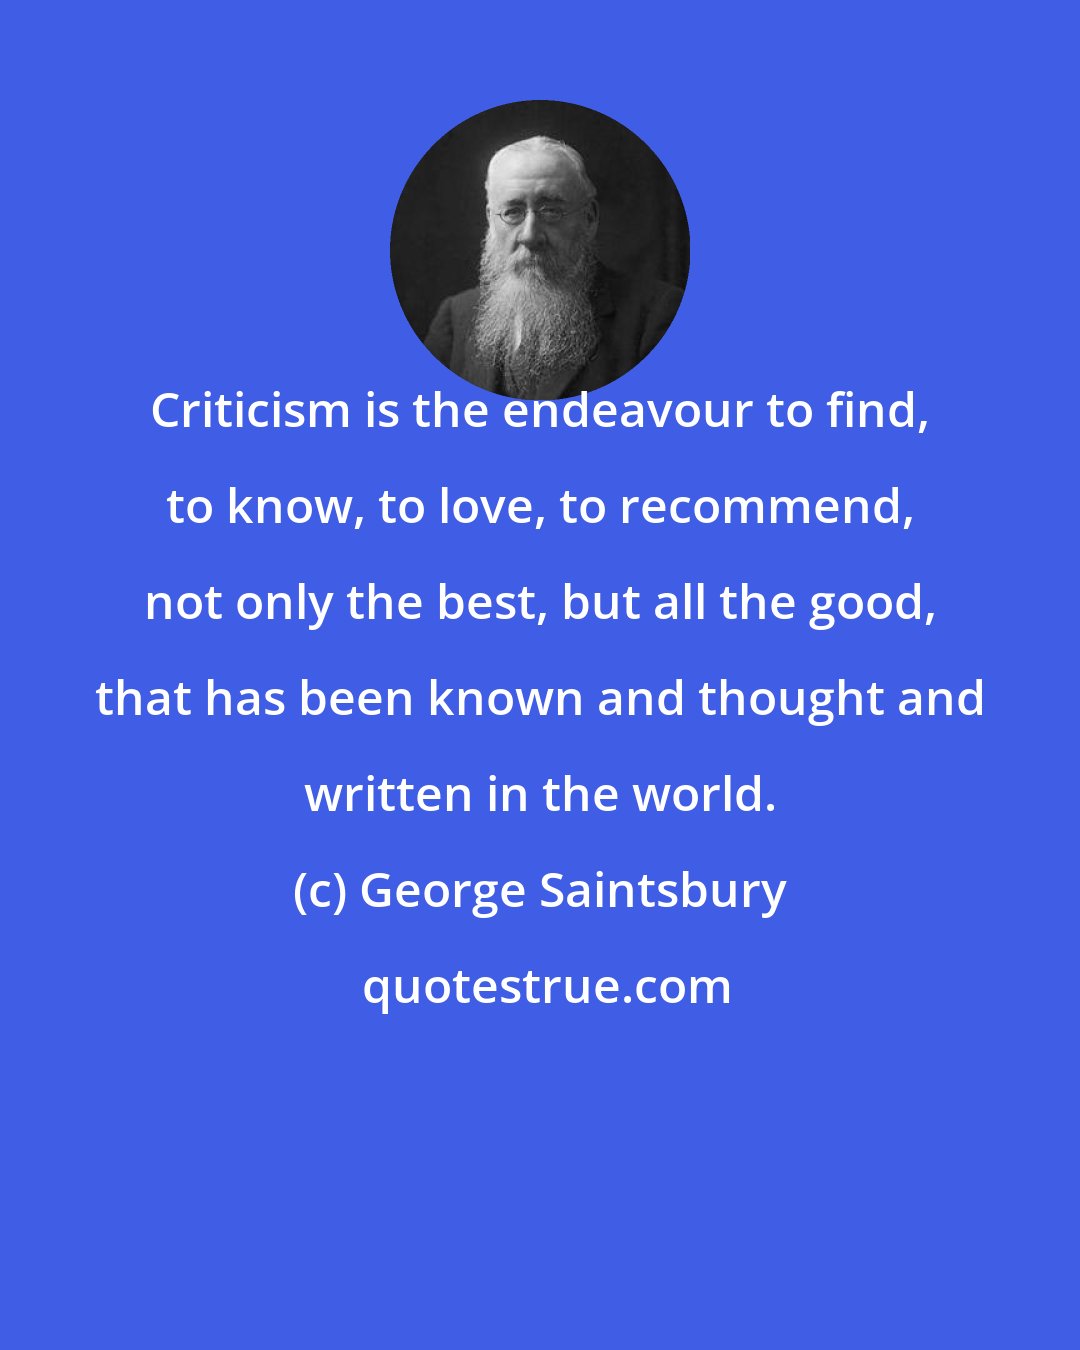 George Saintsbury: Criticism is the endeavour to find, to know, to love, to recommend, not only the best, but all the good, that has been known and thought and written in the world.